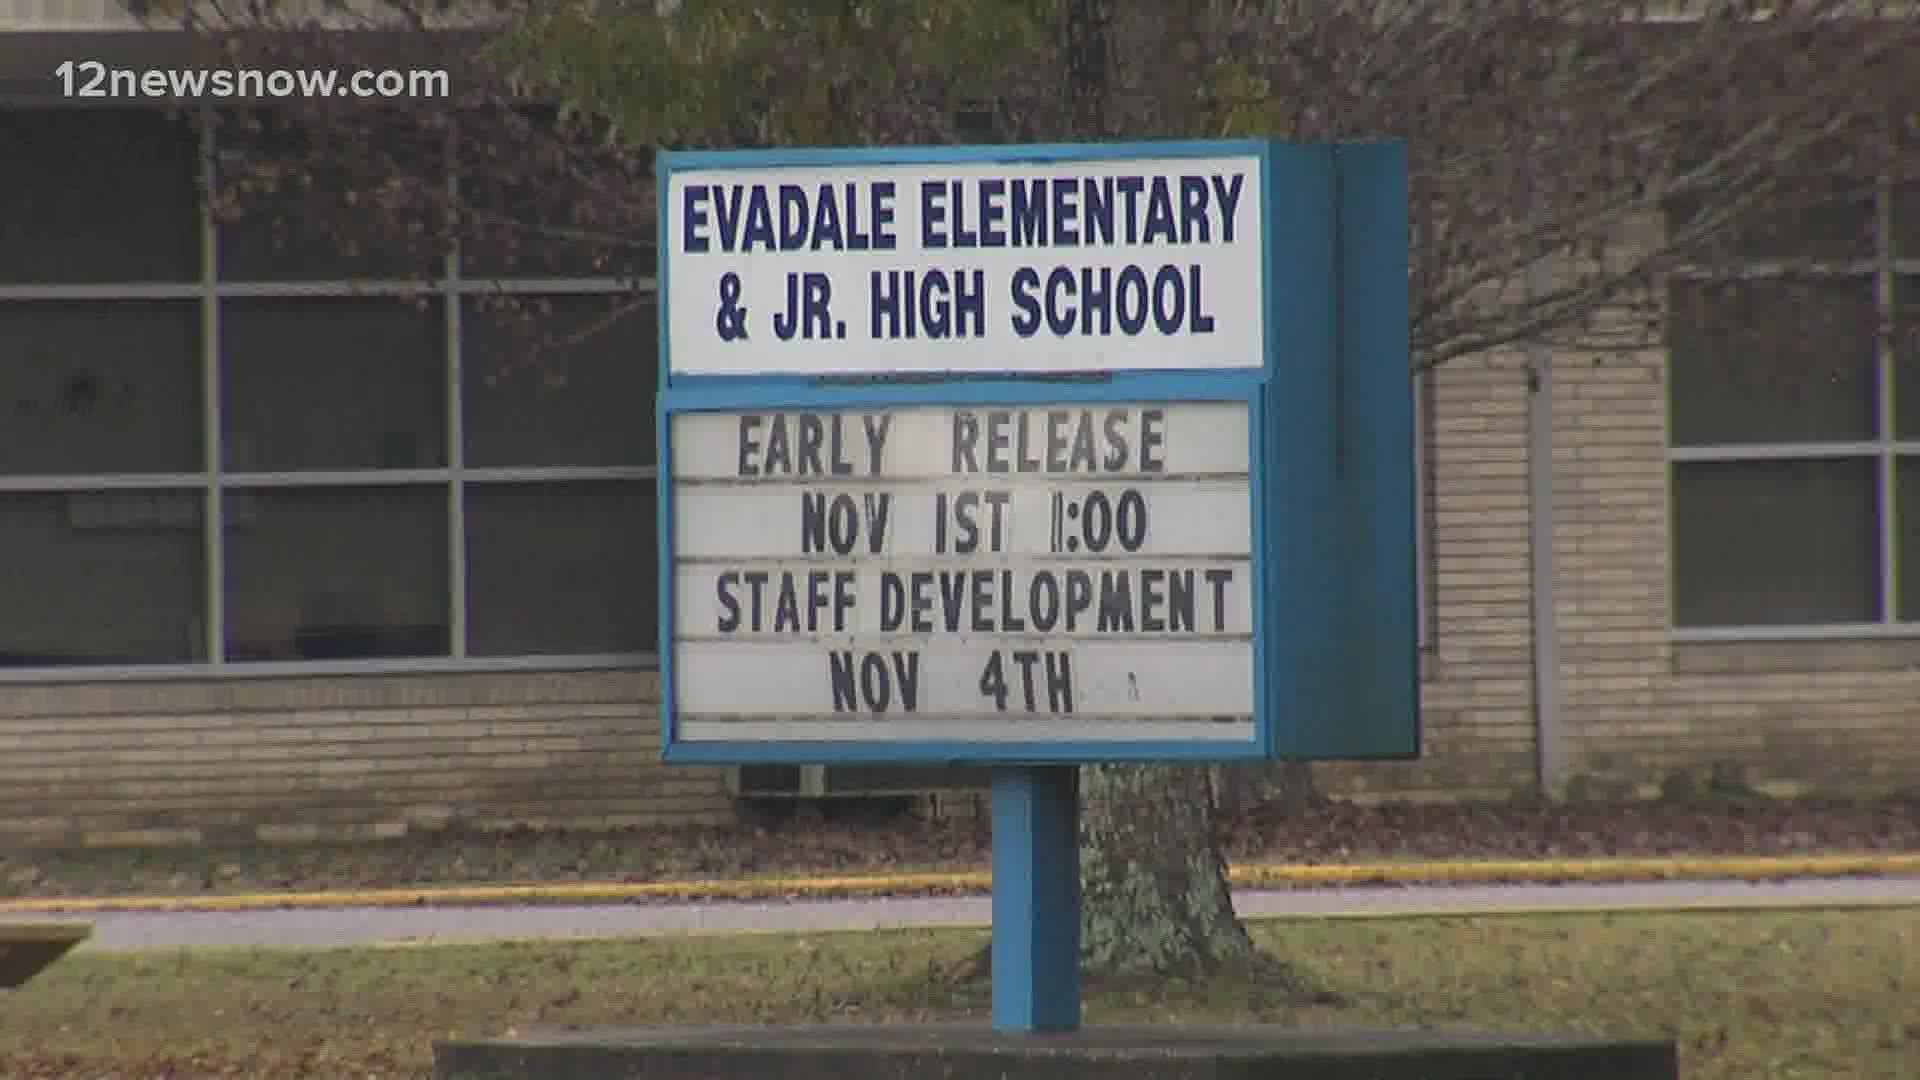 The district is encouraging parents to monitor students for any symptoms of the virus